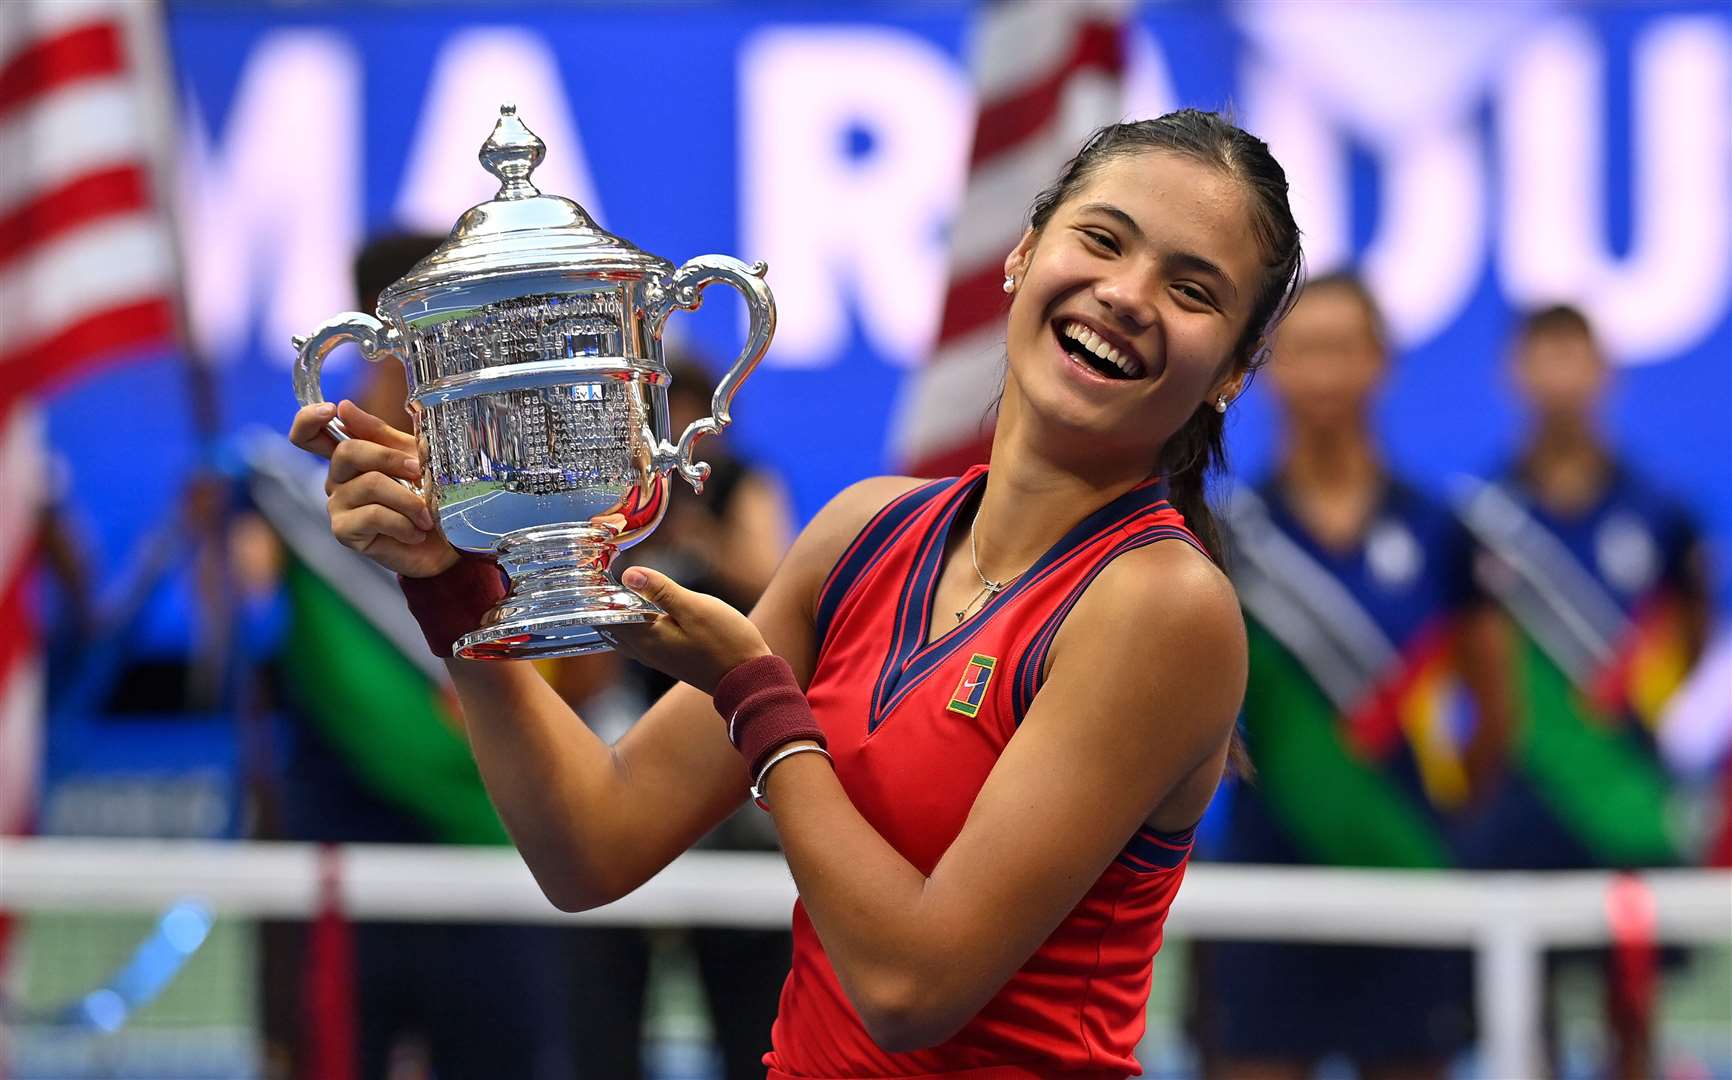 US Open champion Emma Raducanu is fit for this year's Wimbledon. Picture: Paul Zimmer via www.imago-images.de/Imago/PA Images